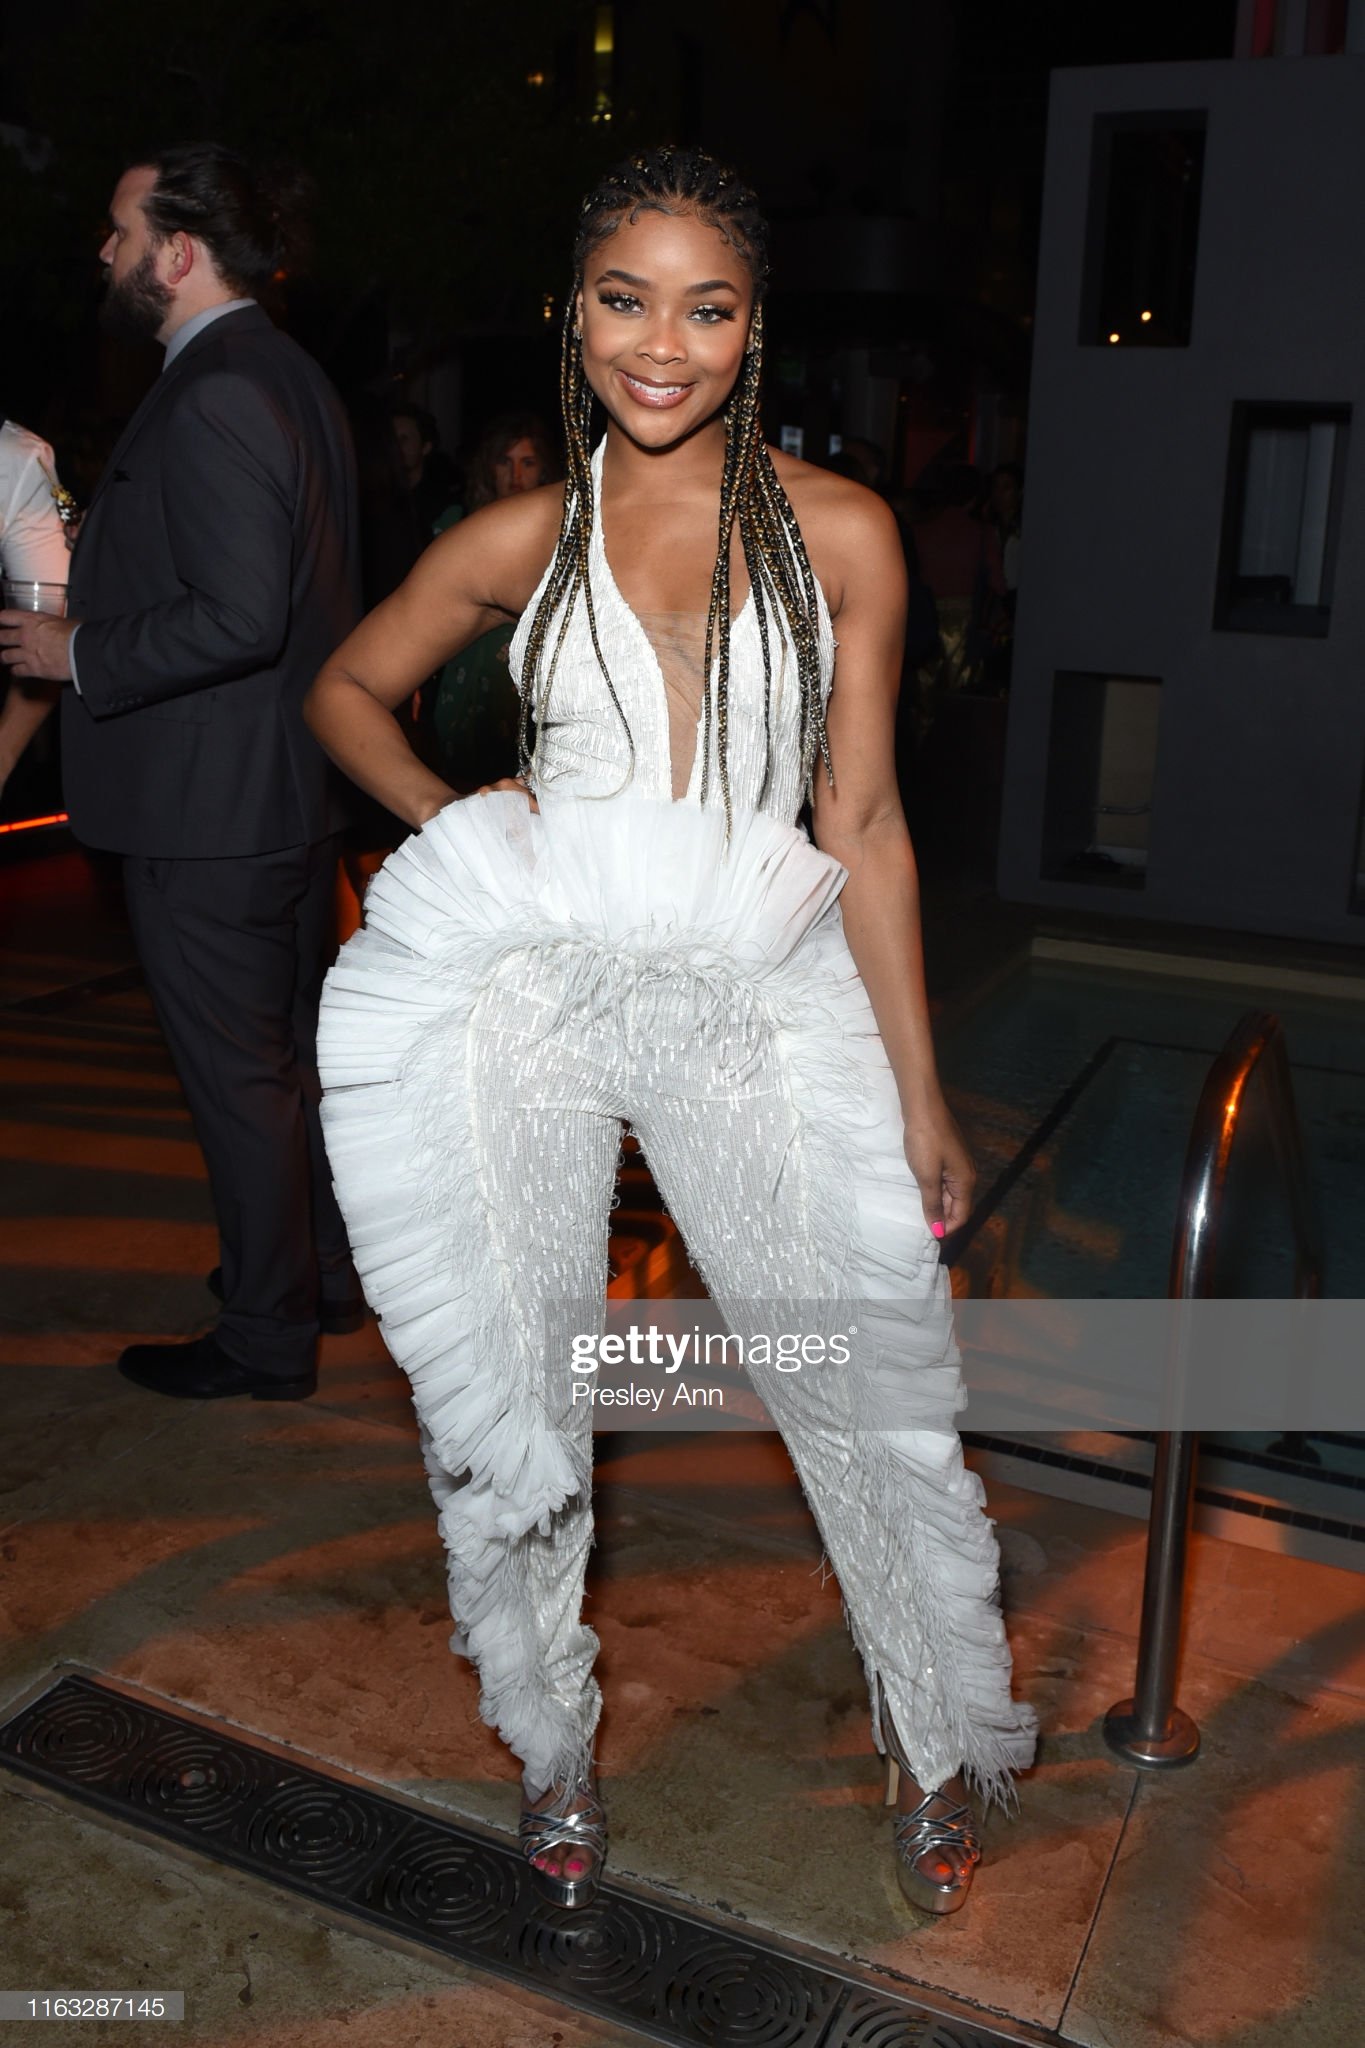  SAN DIEGO, CALIFORNIA - JULY 20: Ajiona Alexus attends Entertainment Weekly's Comic-Con Bash held at FLOAT, Hard Rock Hotel San Diego on July 20, 2019 in San Diego, California sponsored by HBO. (Photo by Presley Ann/Getty Images for Entertainment We